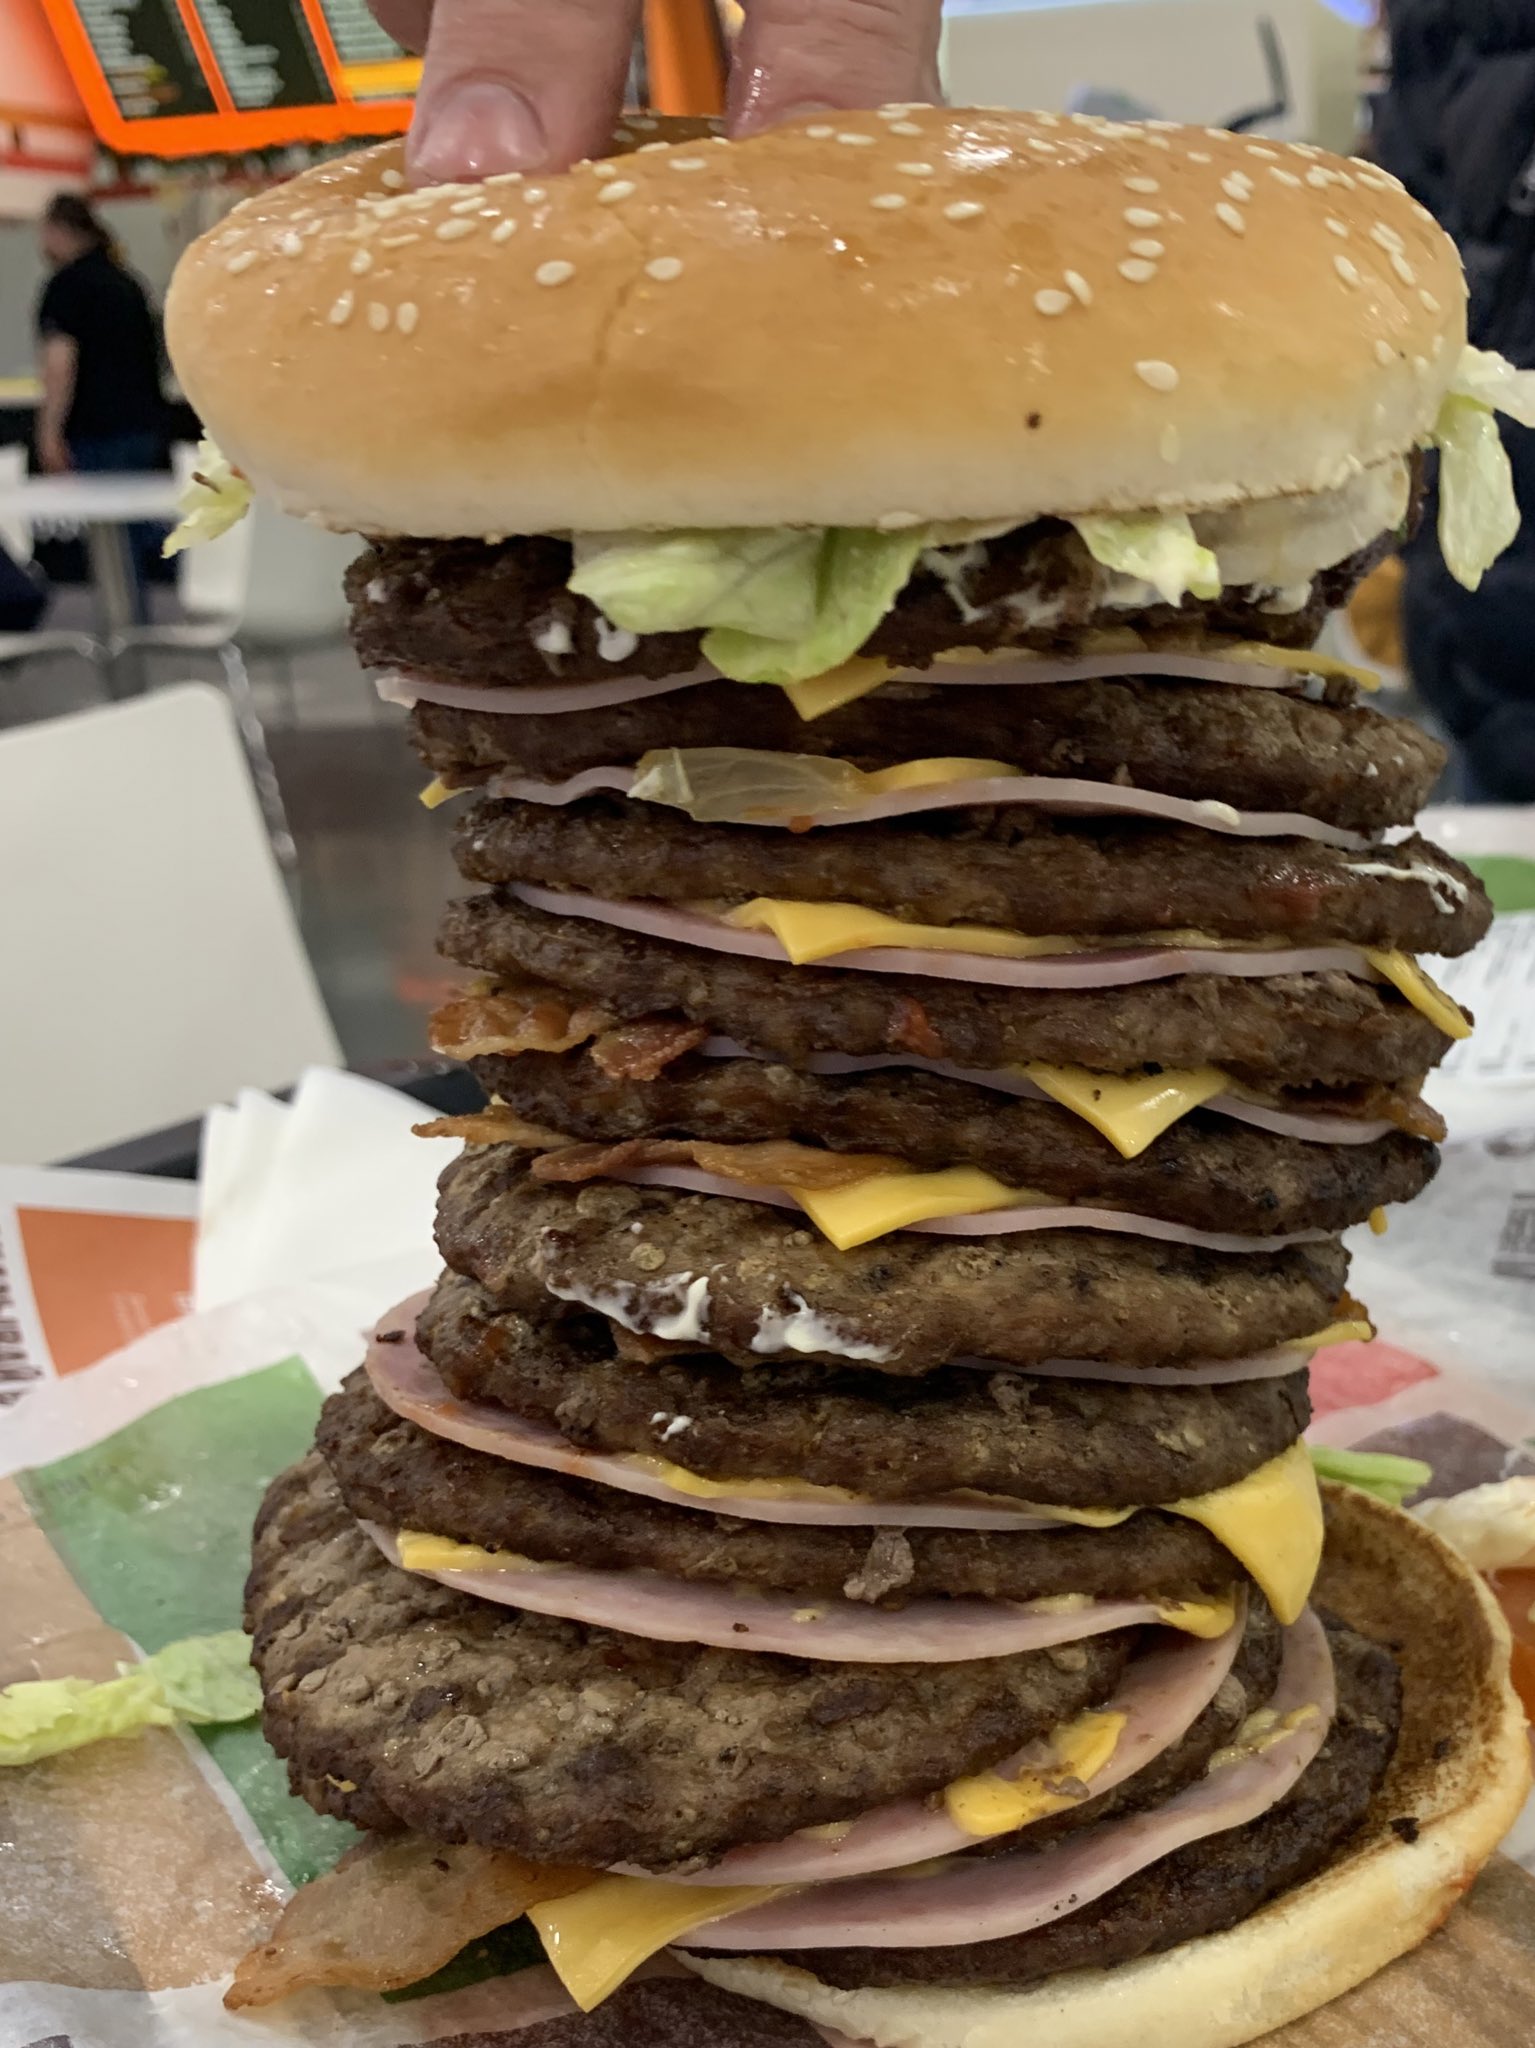 Shynapse on X: Was hungry, bought triple whopper with 10